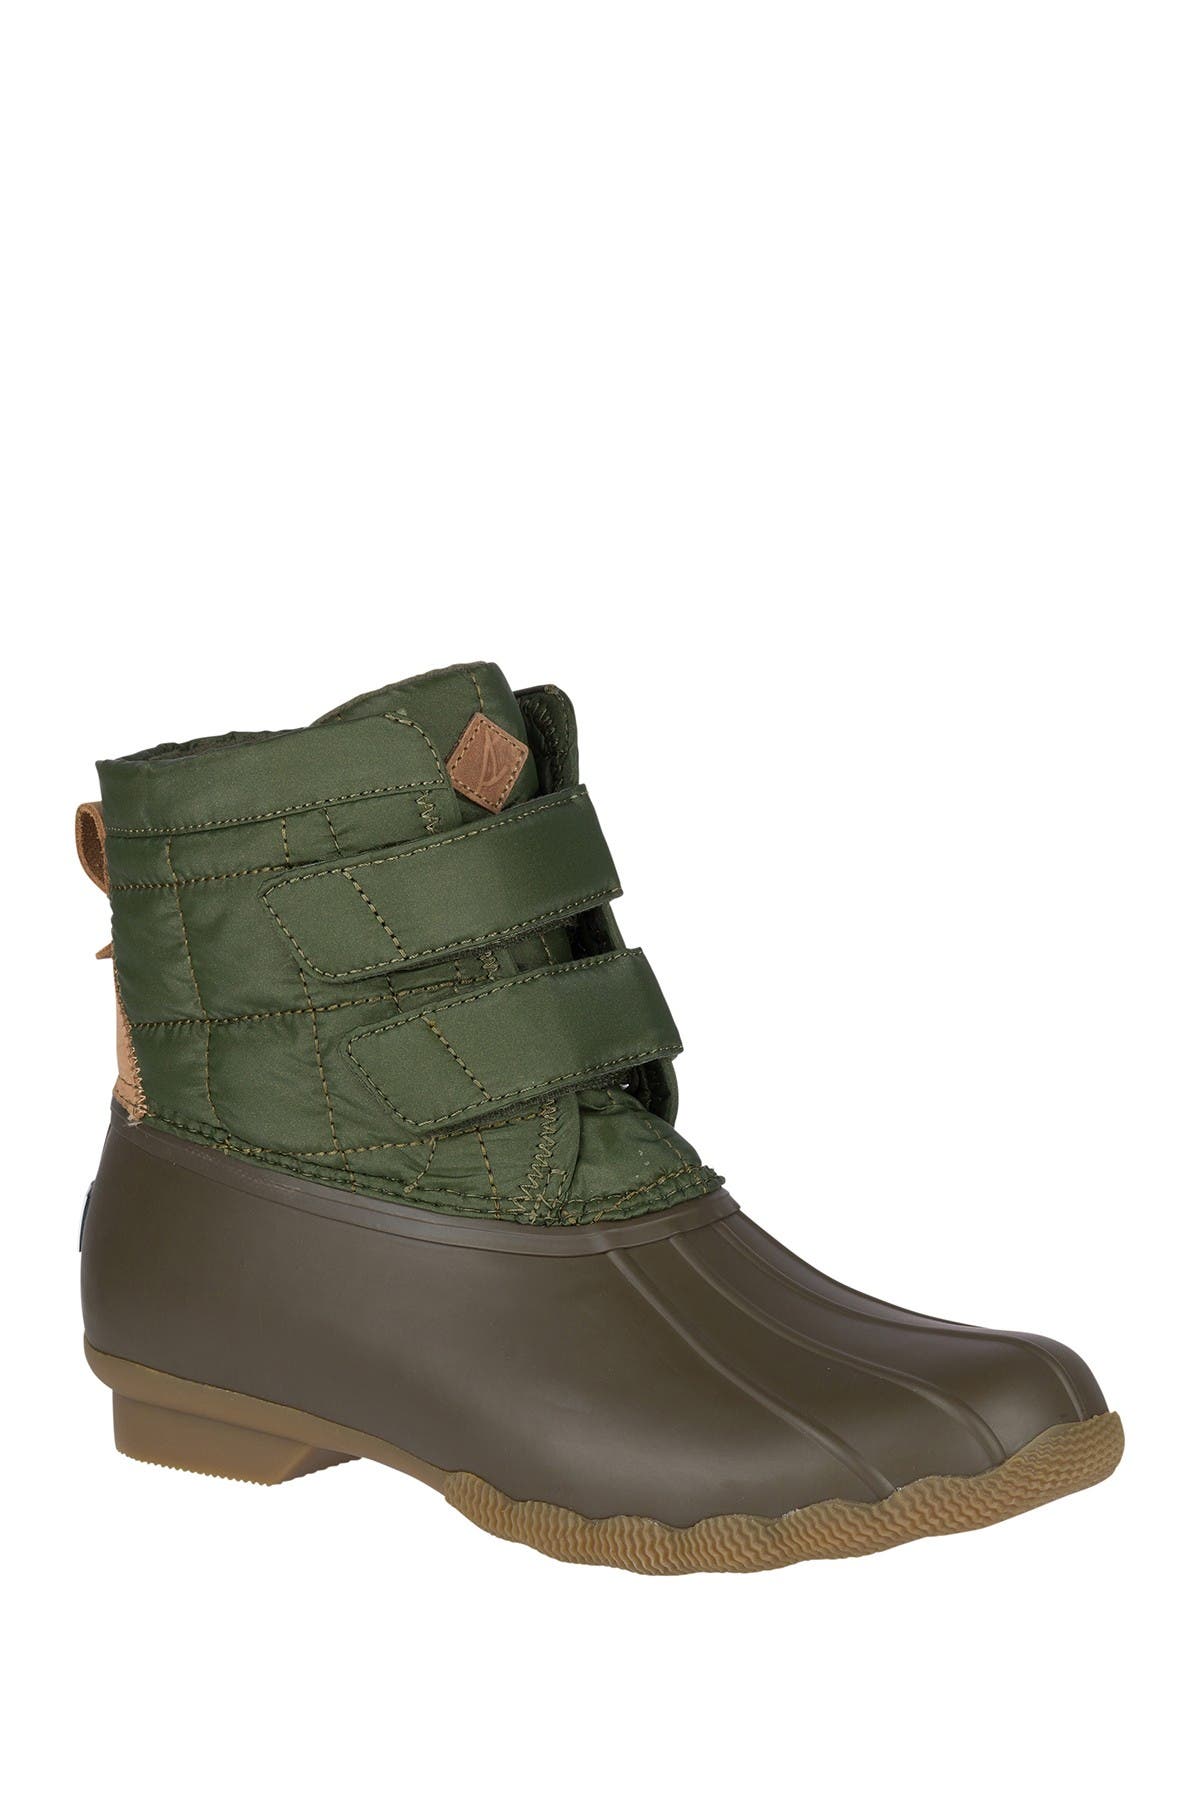 sperry jetty duck boots